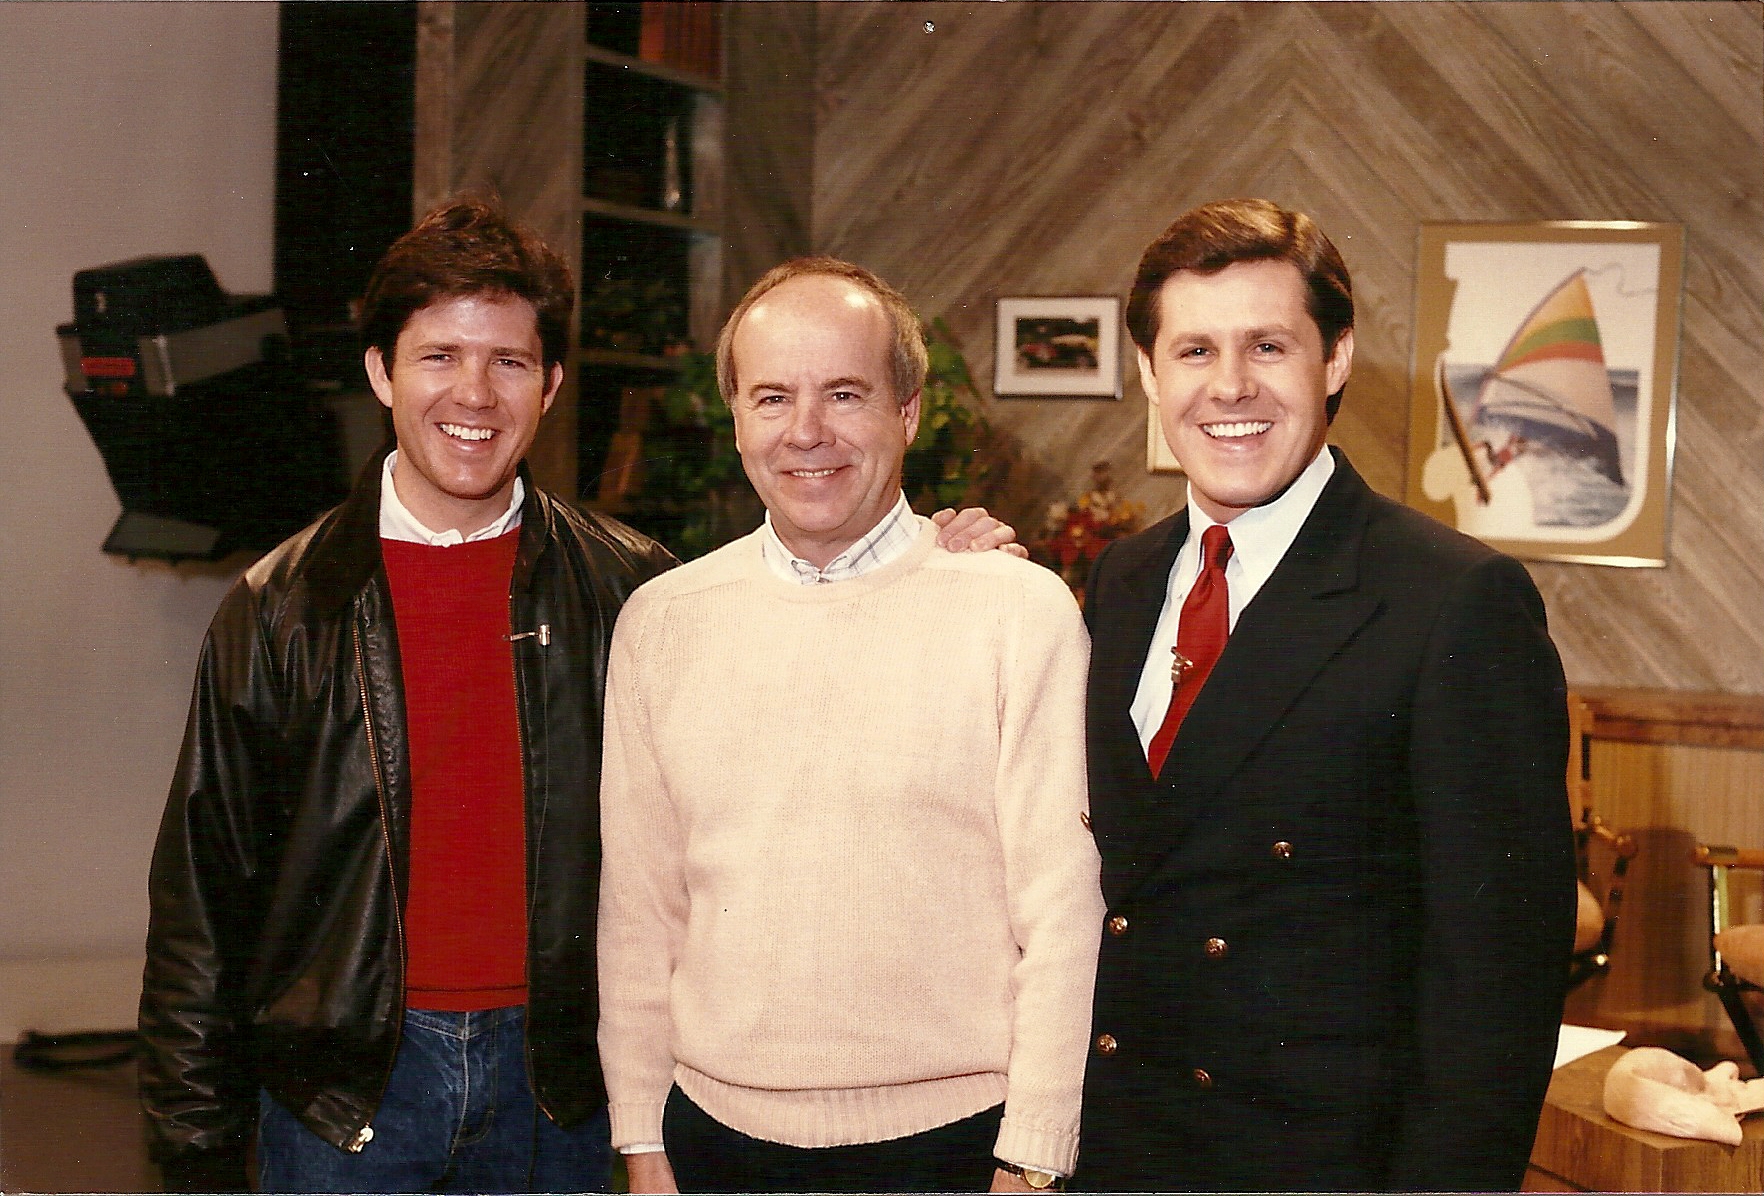 Tim Conway appears on the McCain Brothers show in Oklahoma City.